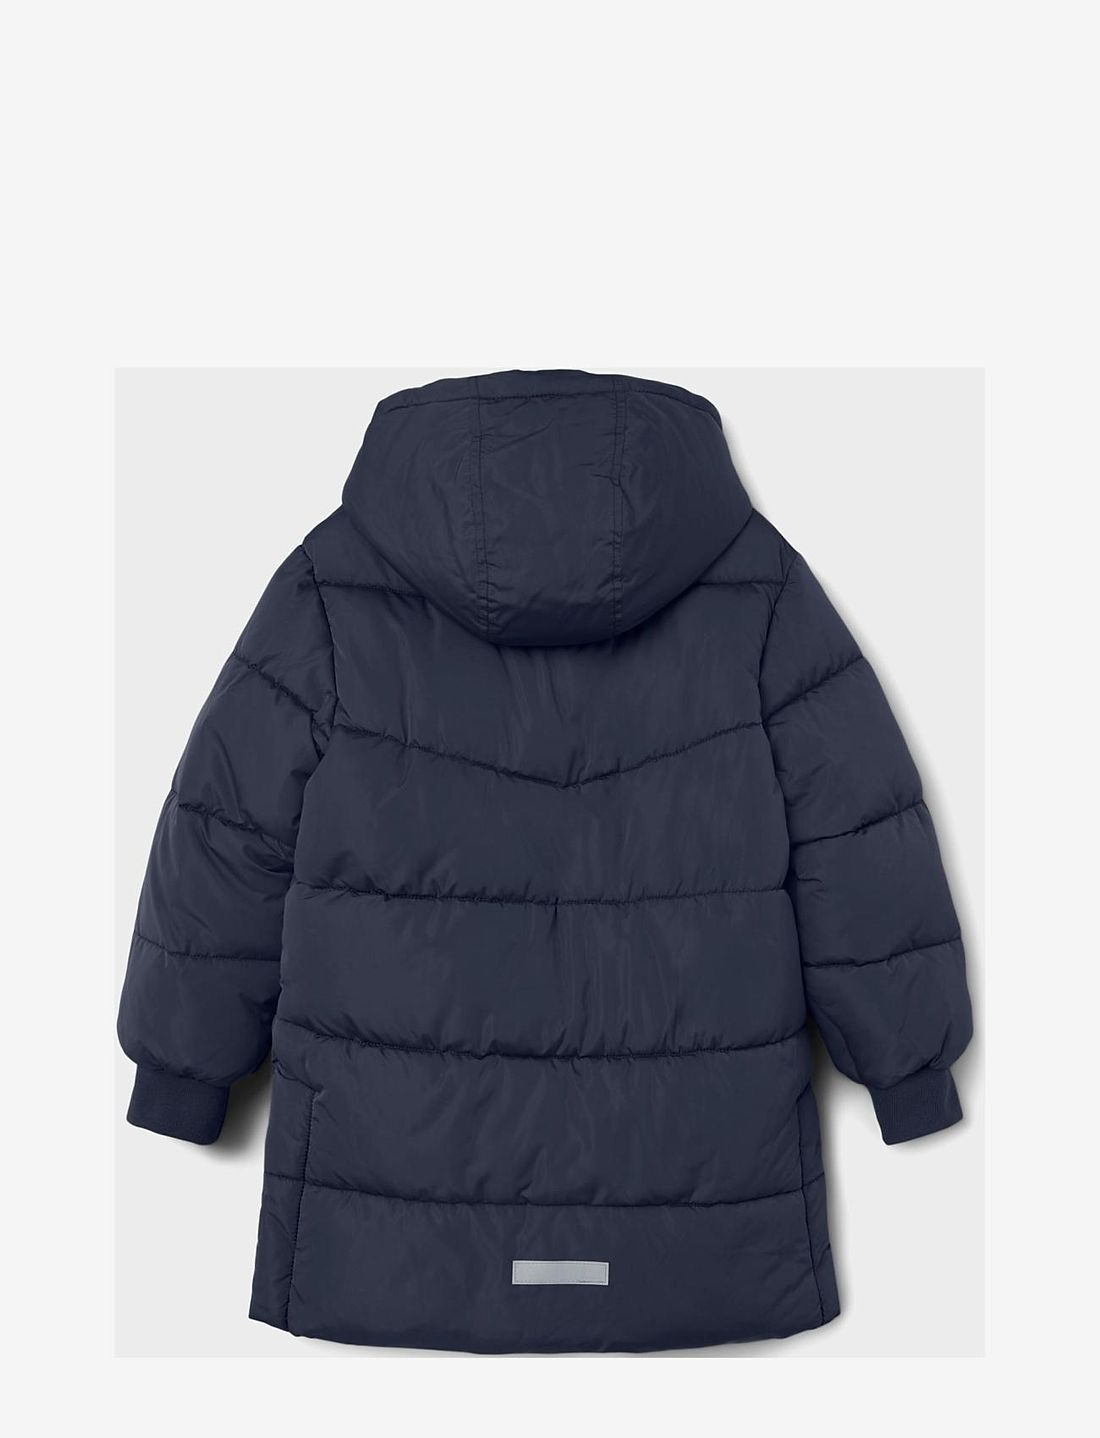 name it Nkfmusic Long Puffer Jacket Tb - 27.50 €. Buy Puffer & Padded from  name it online at Boozt.com. Fast delivery and easy returns